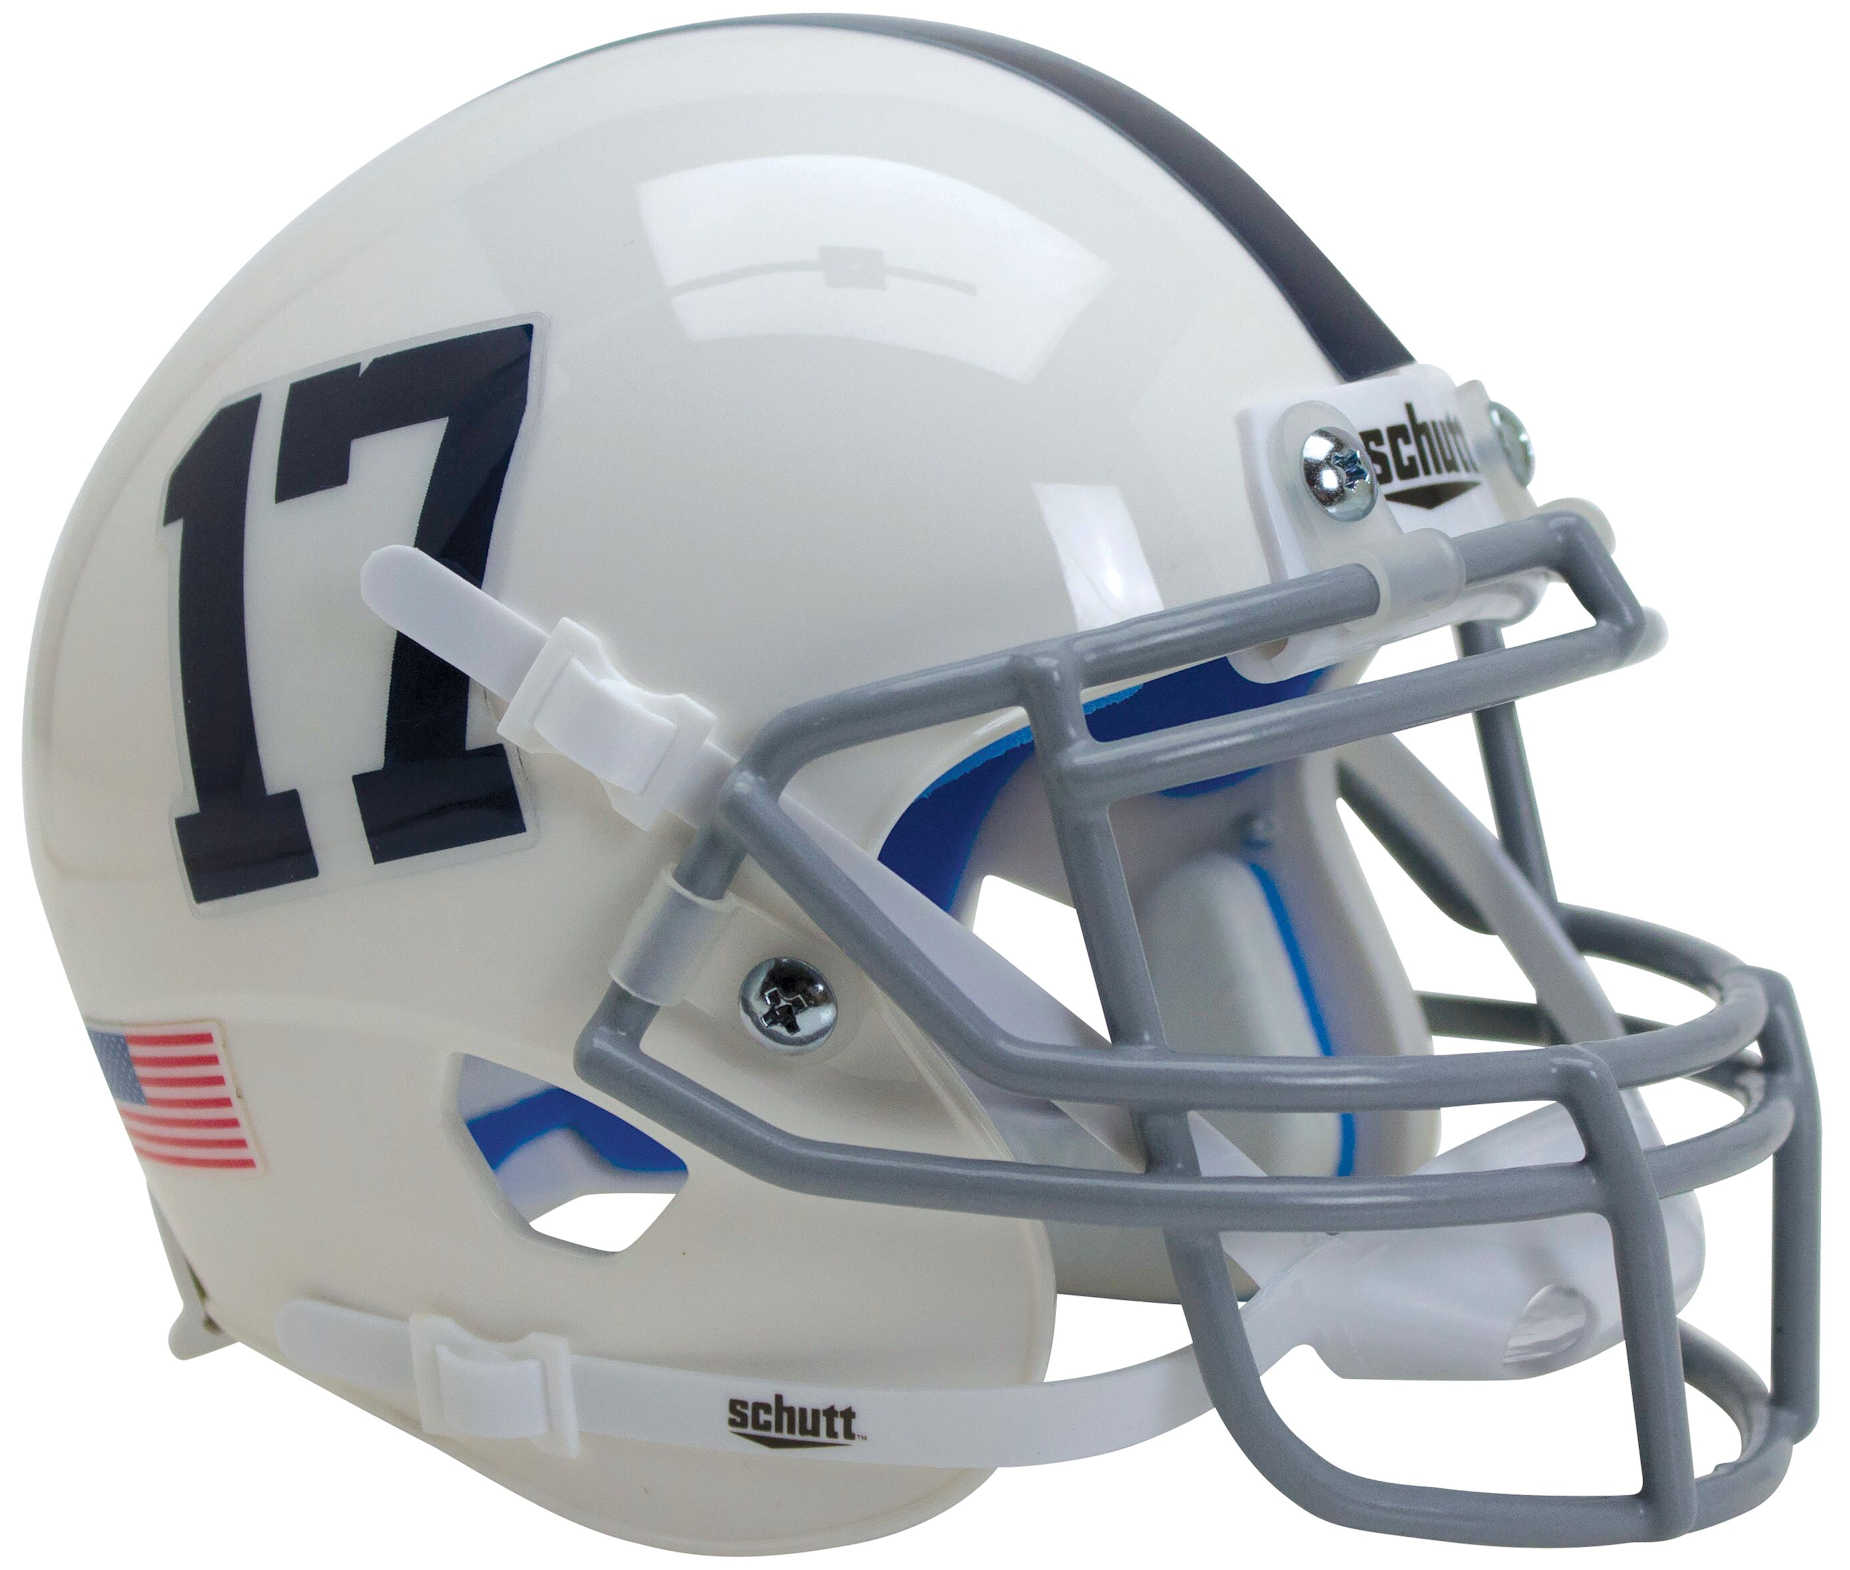 Penn State Nittany Lions Authentic College XP Football Helmet Schutt <B>White Number 17</B>